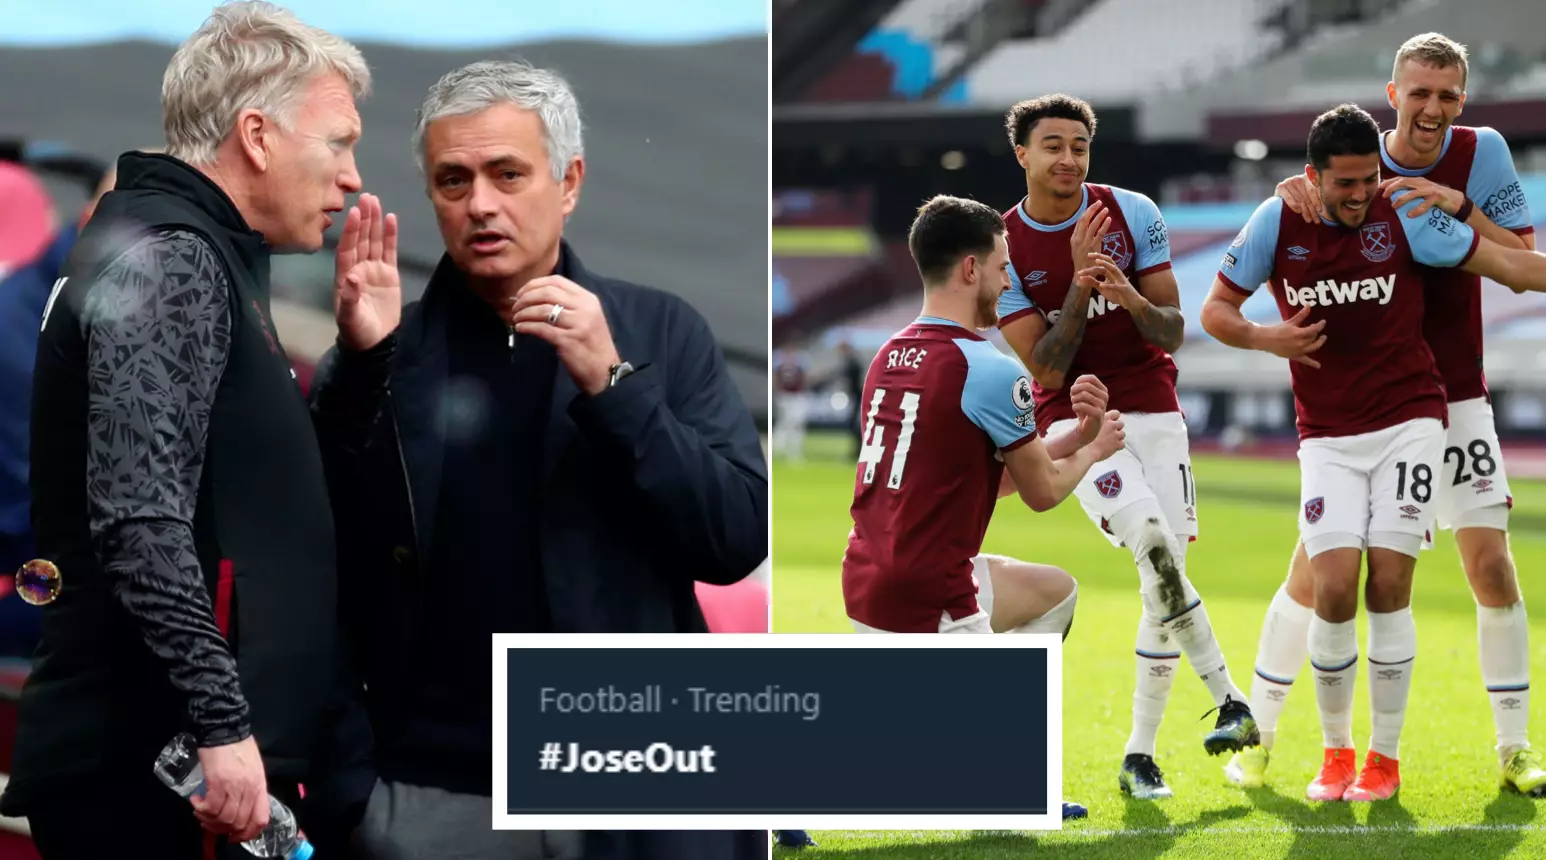 #JoseOut Trends On Twitter As Tottenham Hotspur Lose 2-1 To West Ham